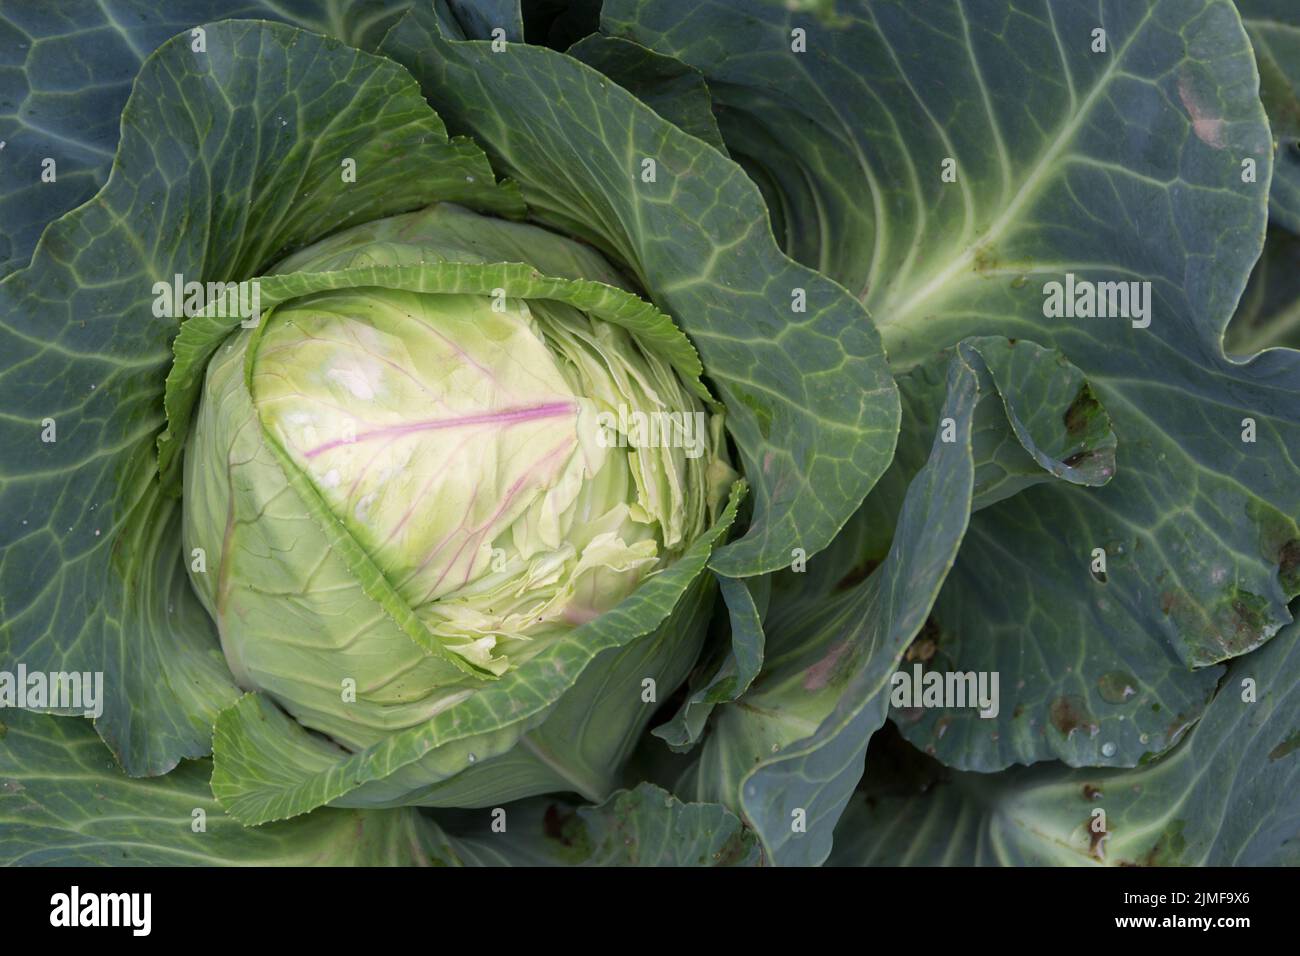 A cabbage eaten by wild rodents in the organic garden Stock Photo